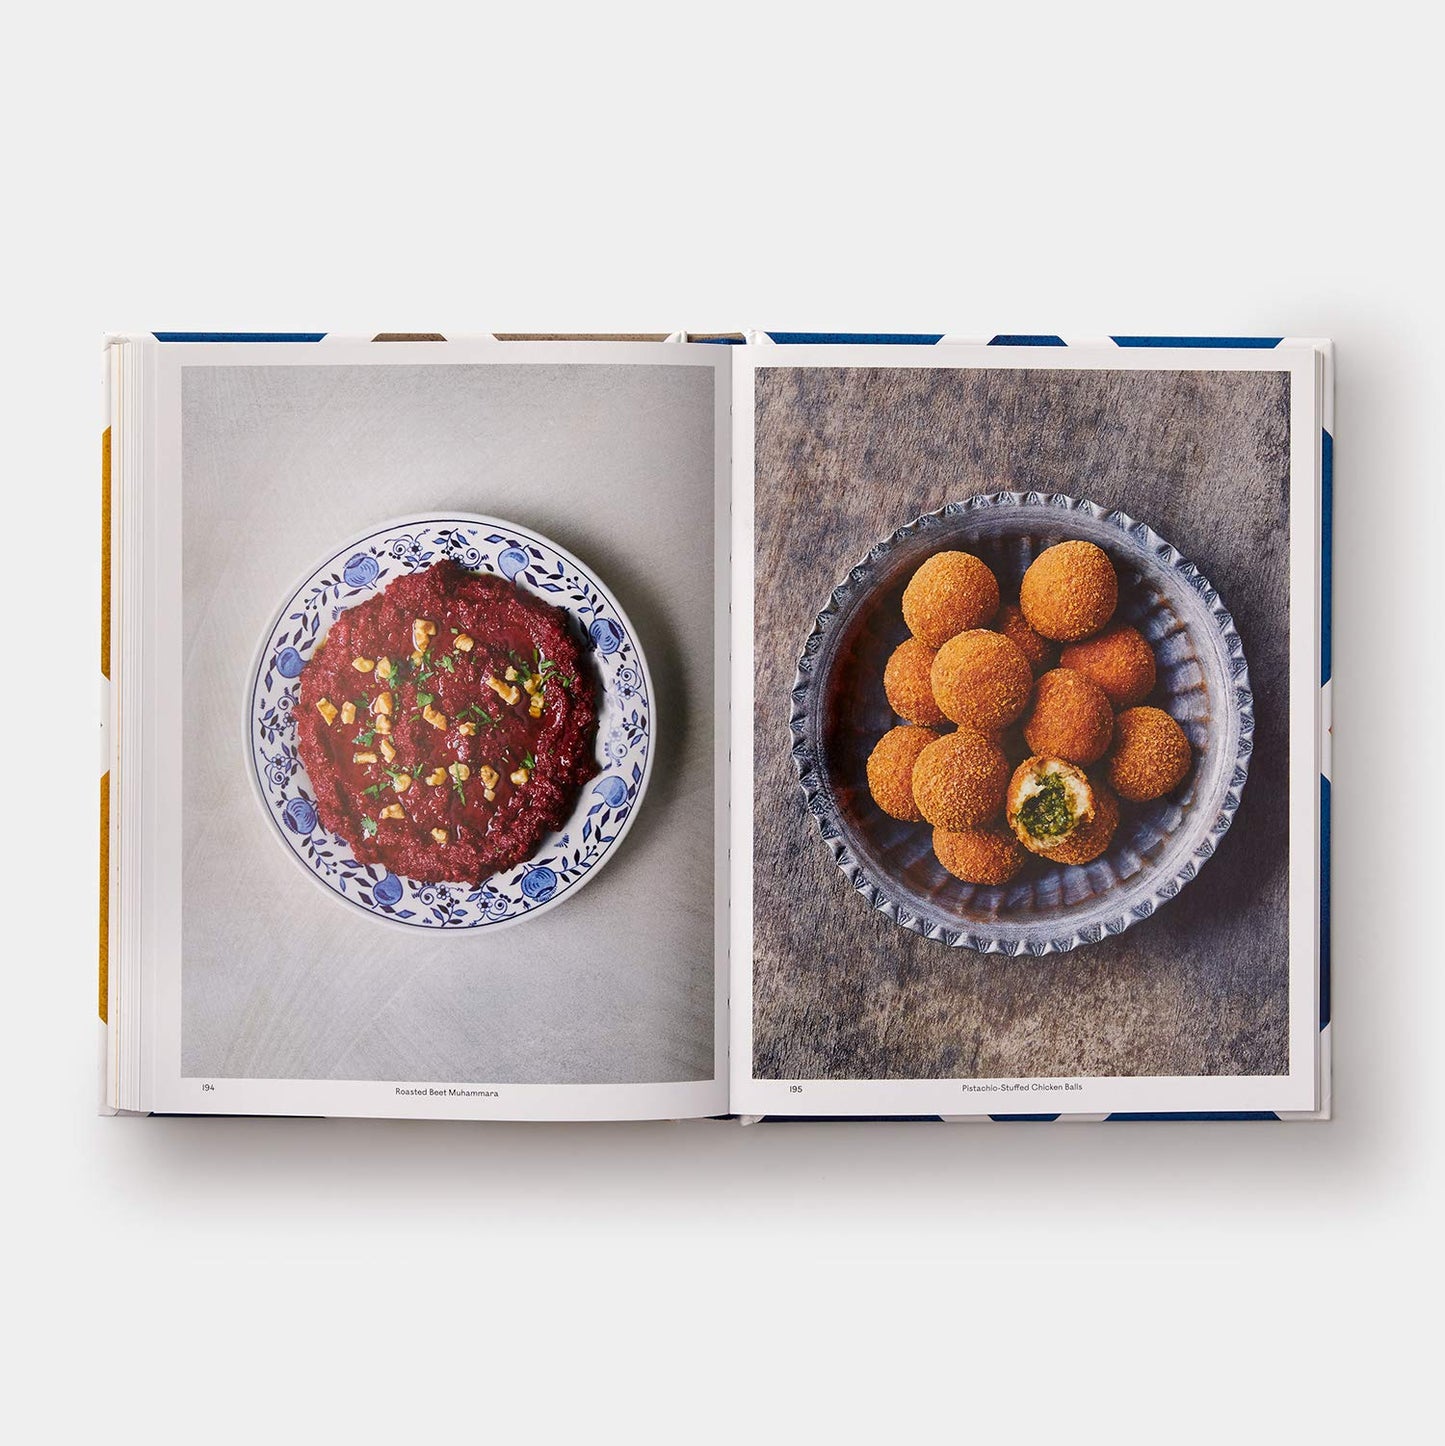 Arabesque Table: Contemporary Recipes from the Arab World